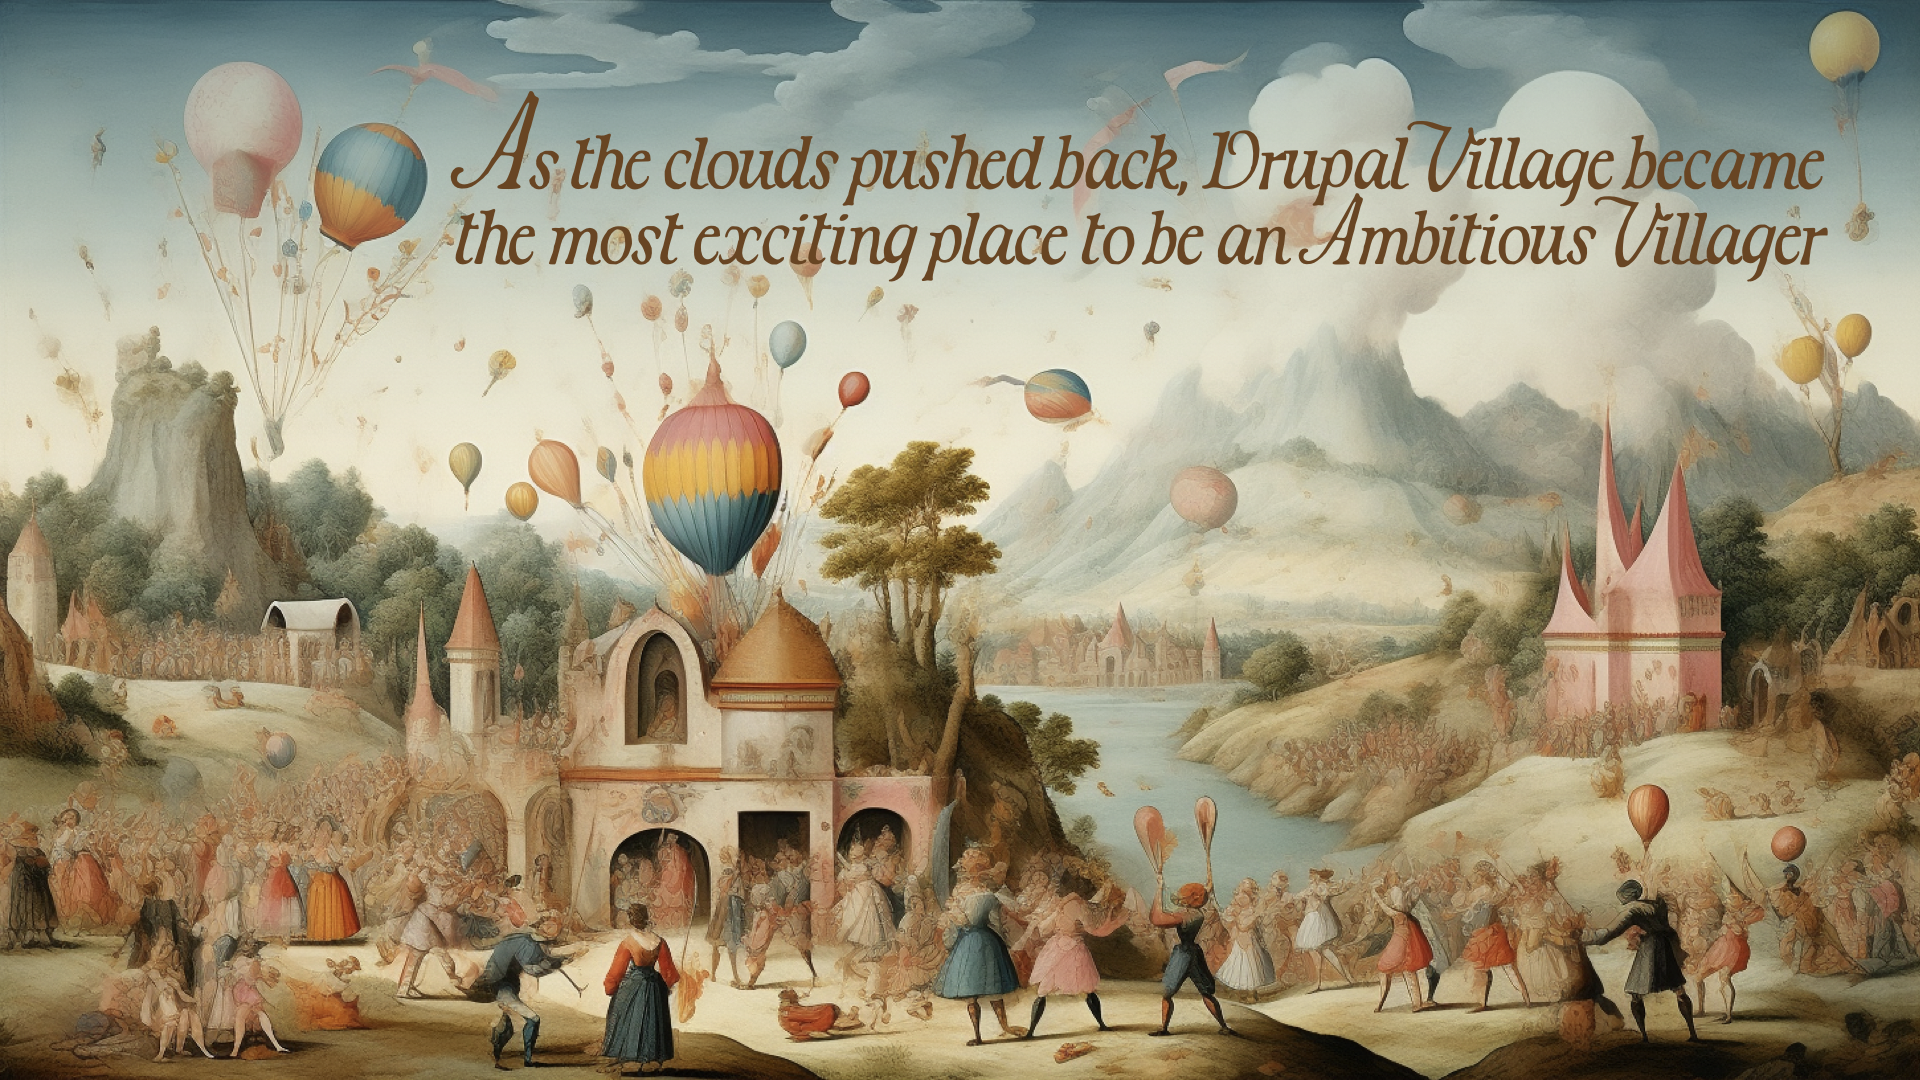 A scene of the Drupal Village showing hot air balloons, villagers celebrating, and picturesque castles.